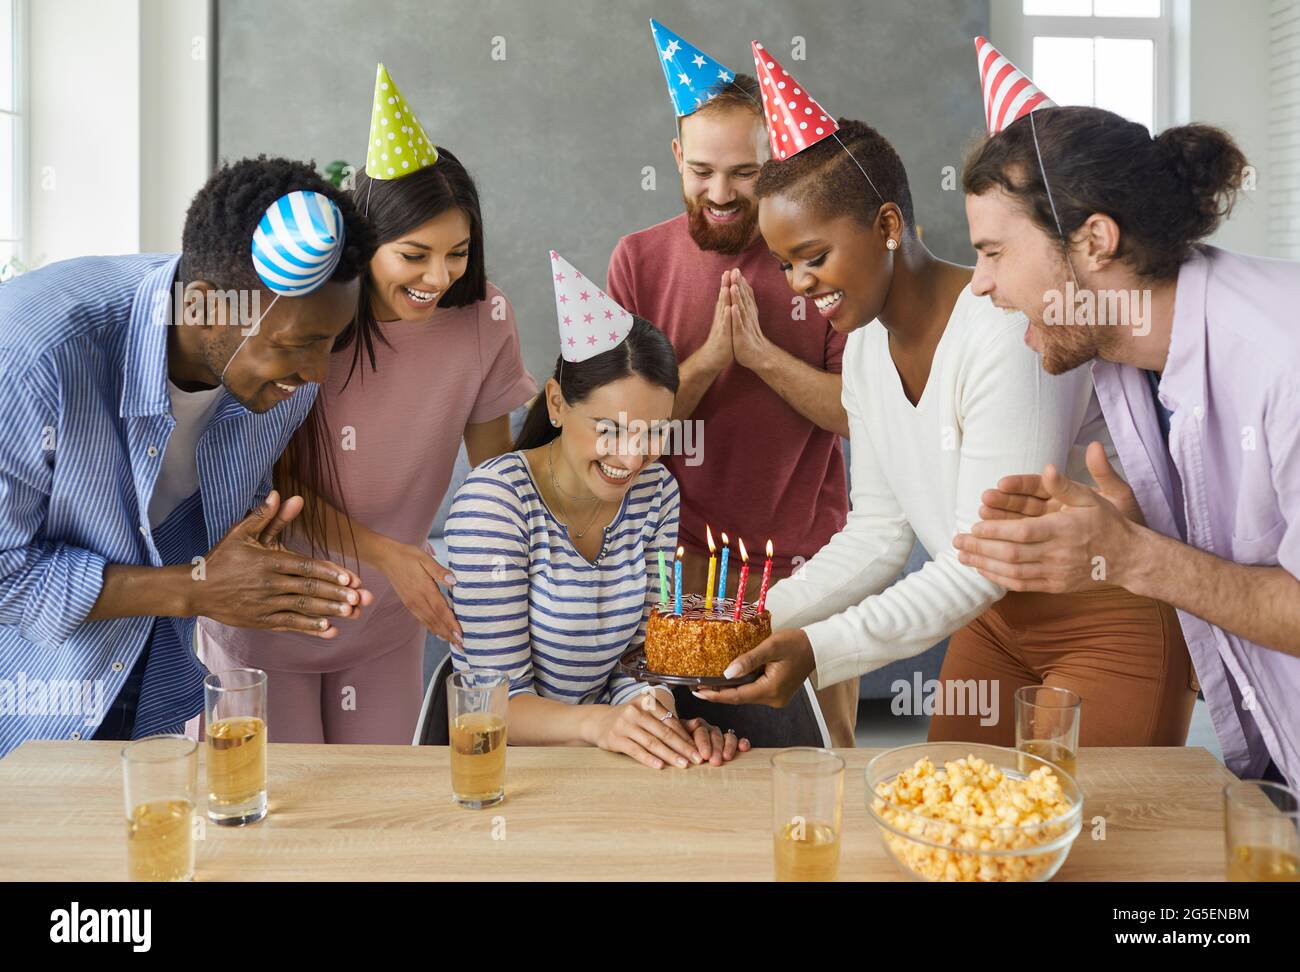 Woman receives birthday greetings and a delicious cake with burning candles given to her by friends. Stock Photo